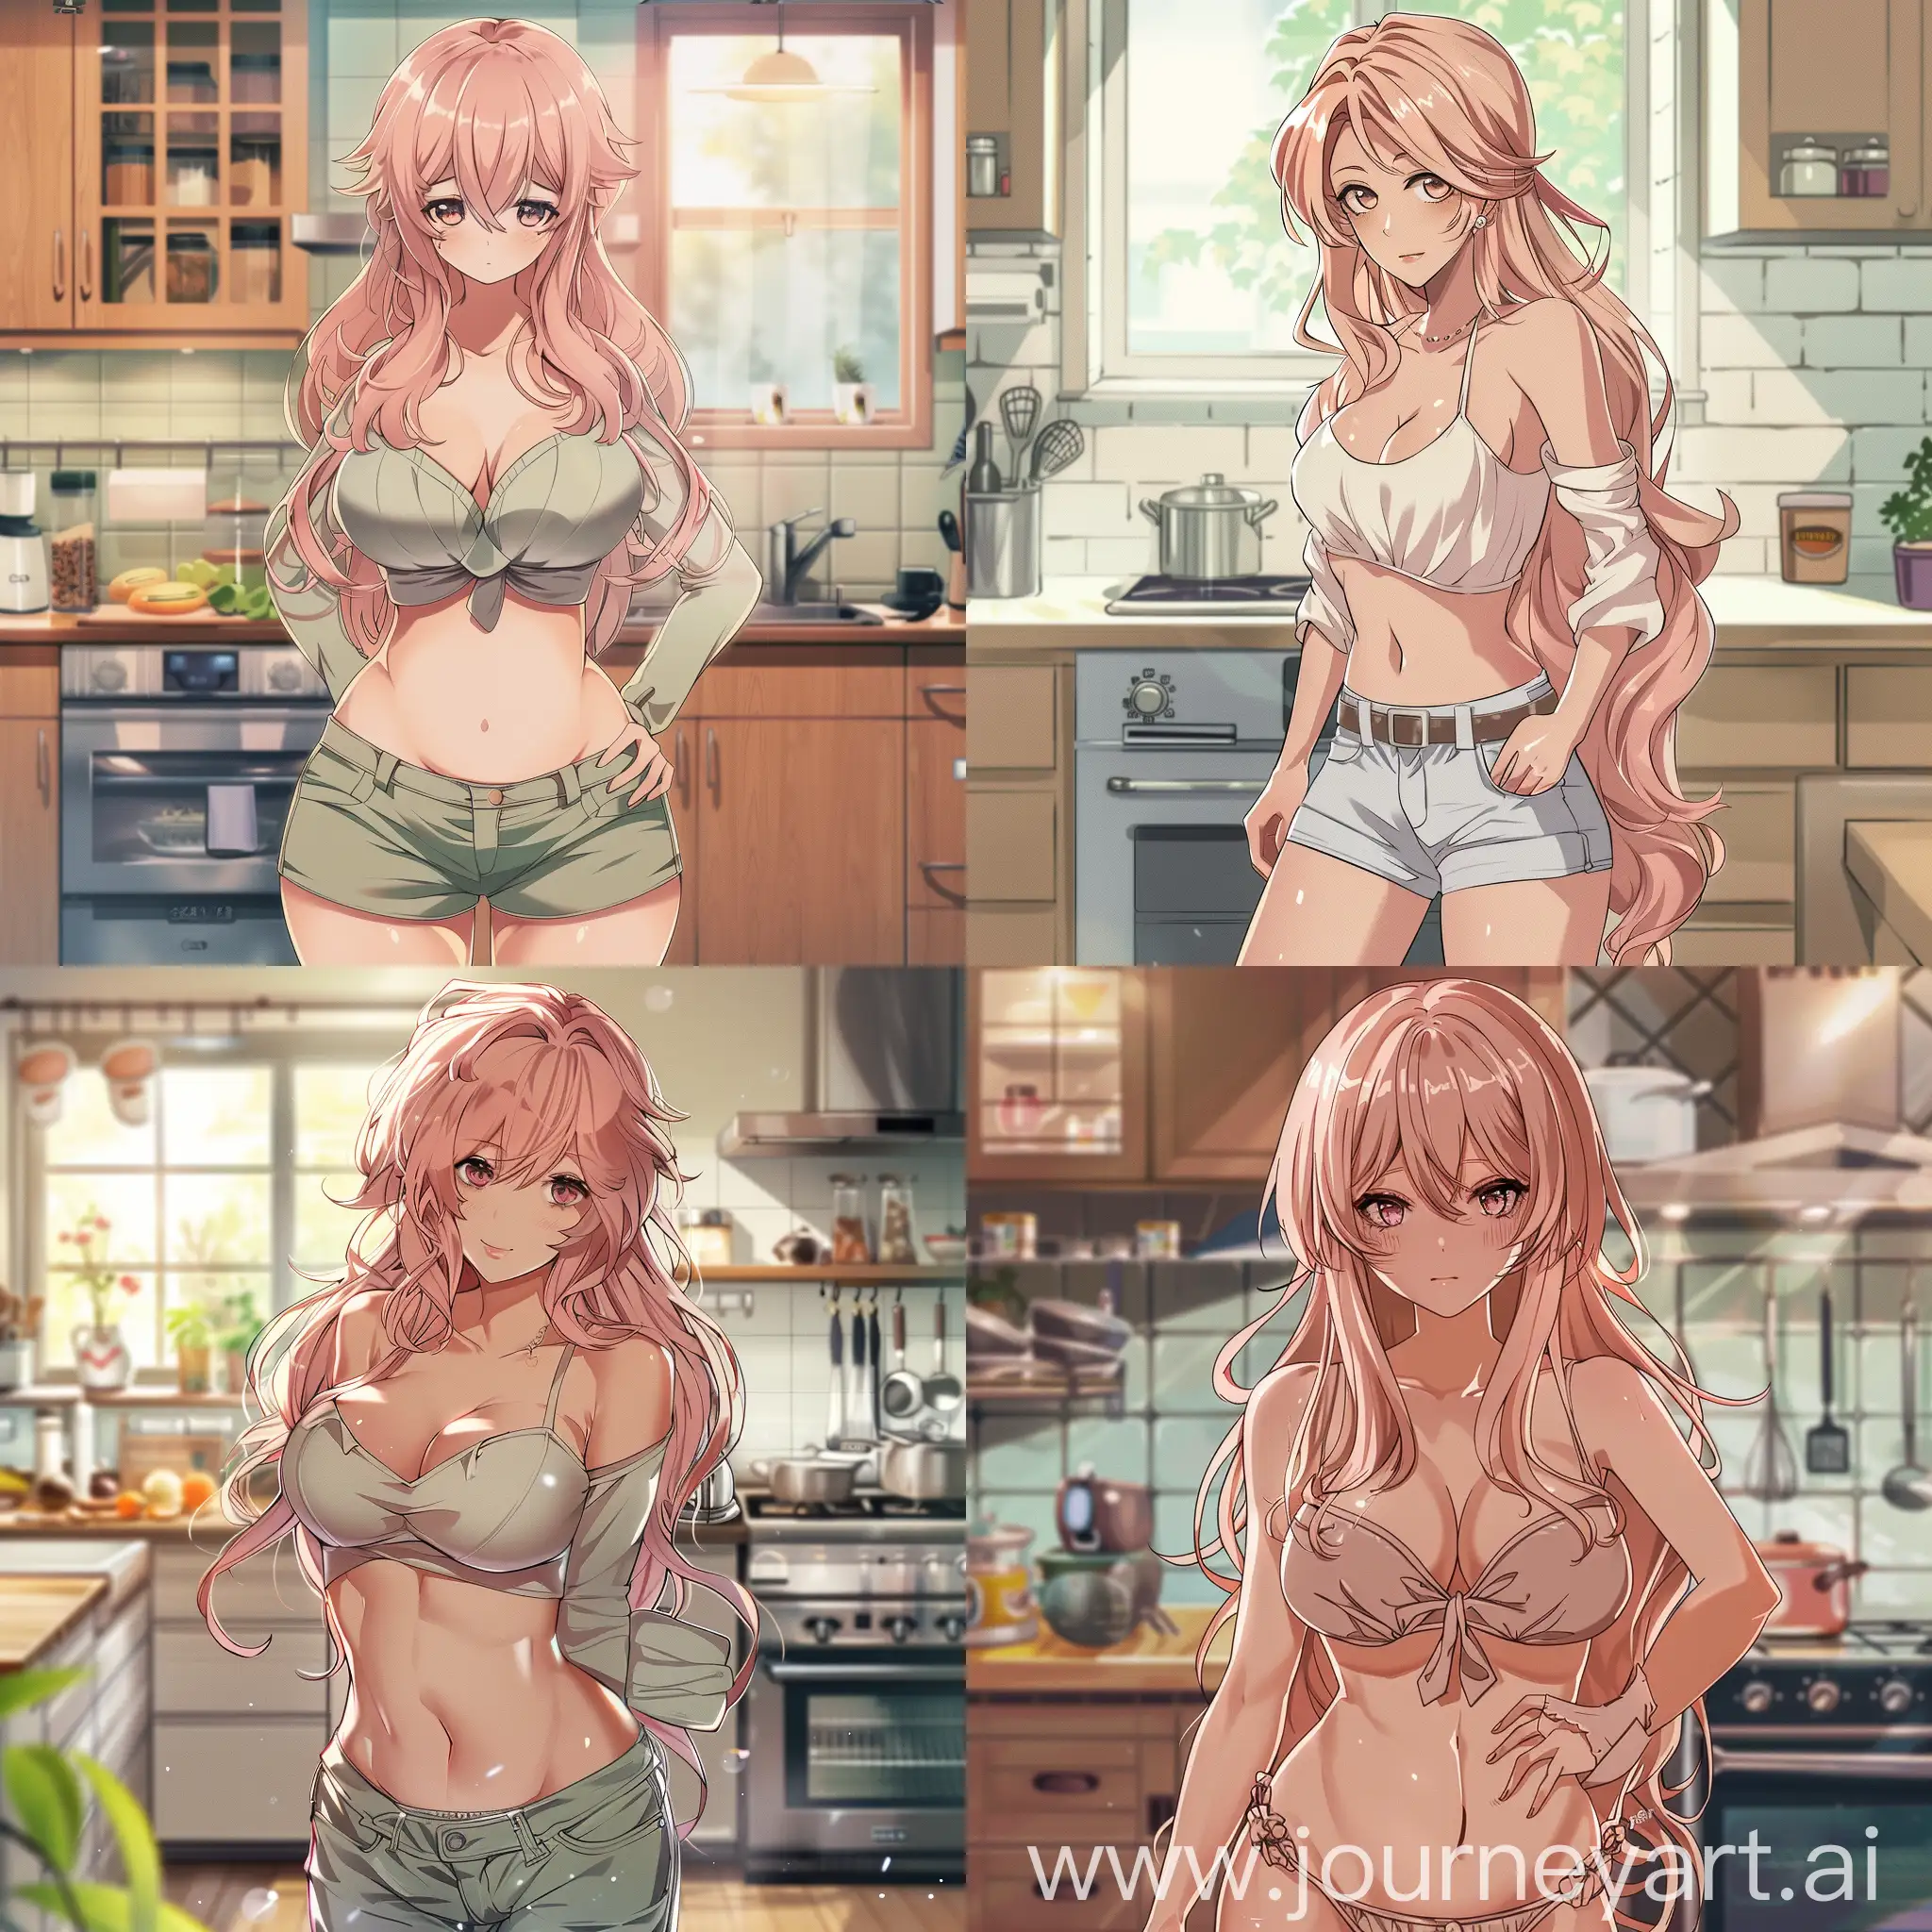 A yaoung woman with a curvy figure with long babypink hair wearing normal clothes, looks motherly and in a kitchen background, anime style